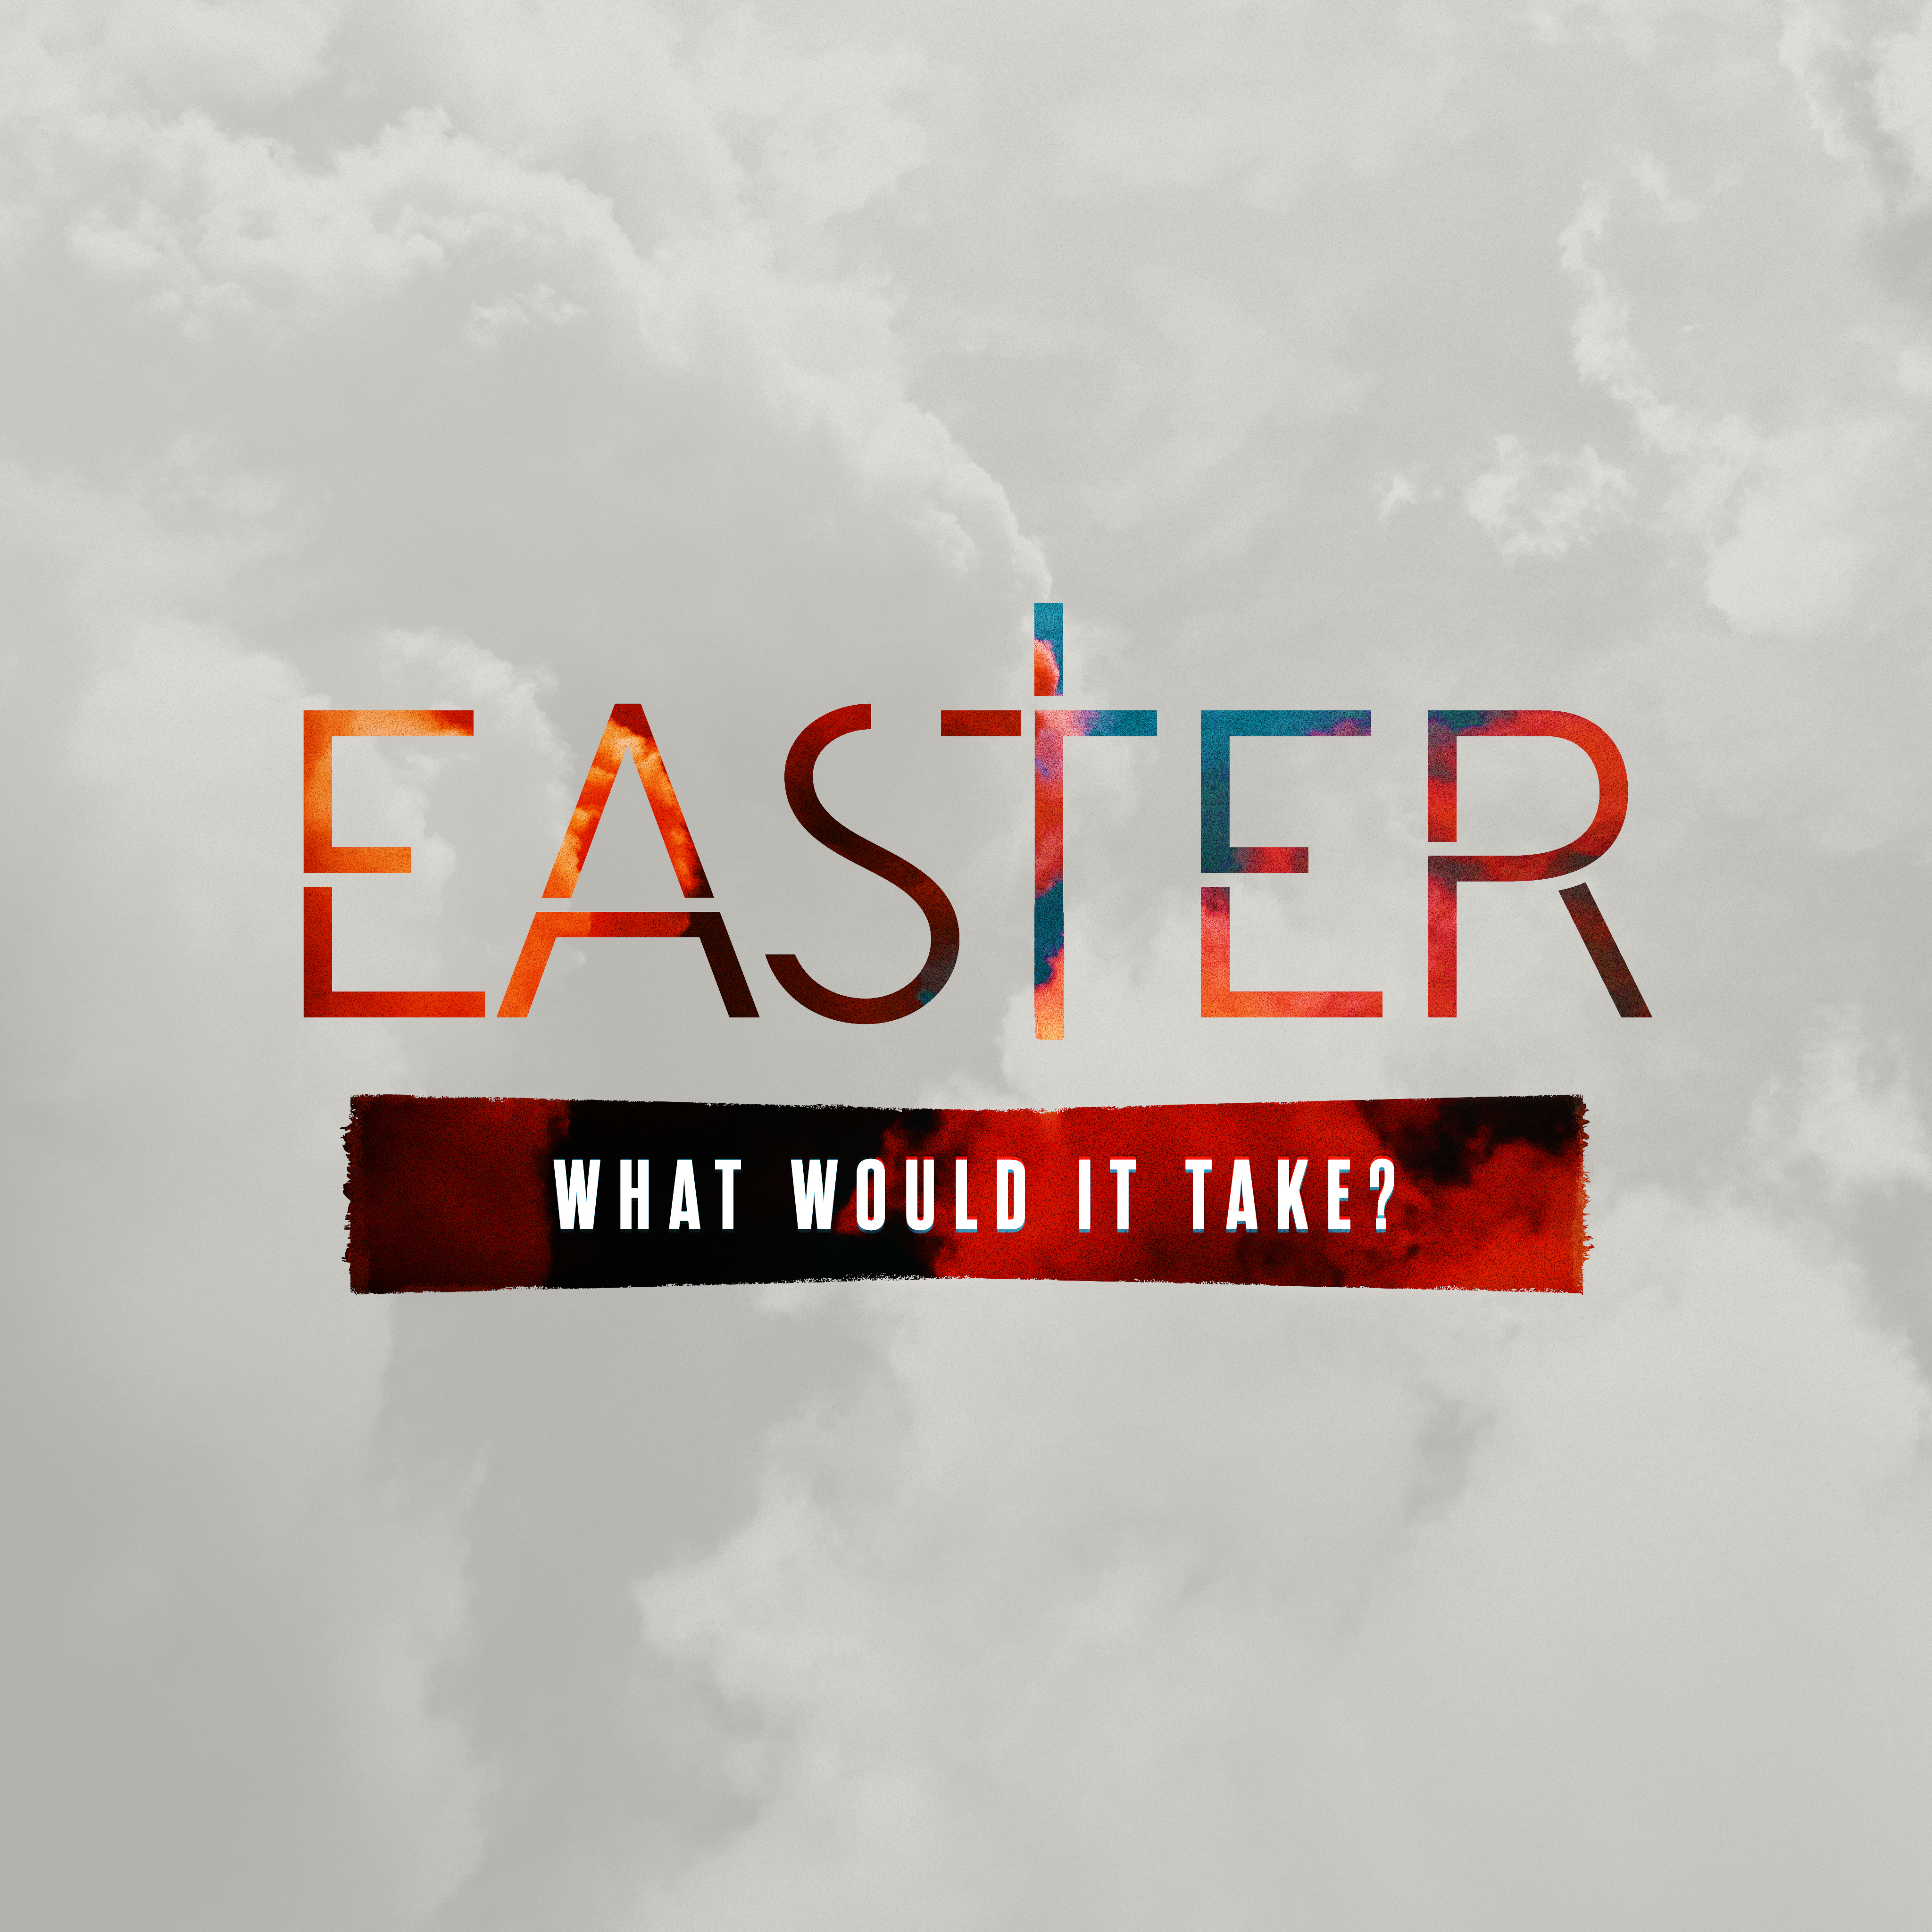 Easter 2021: What Would It Take